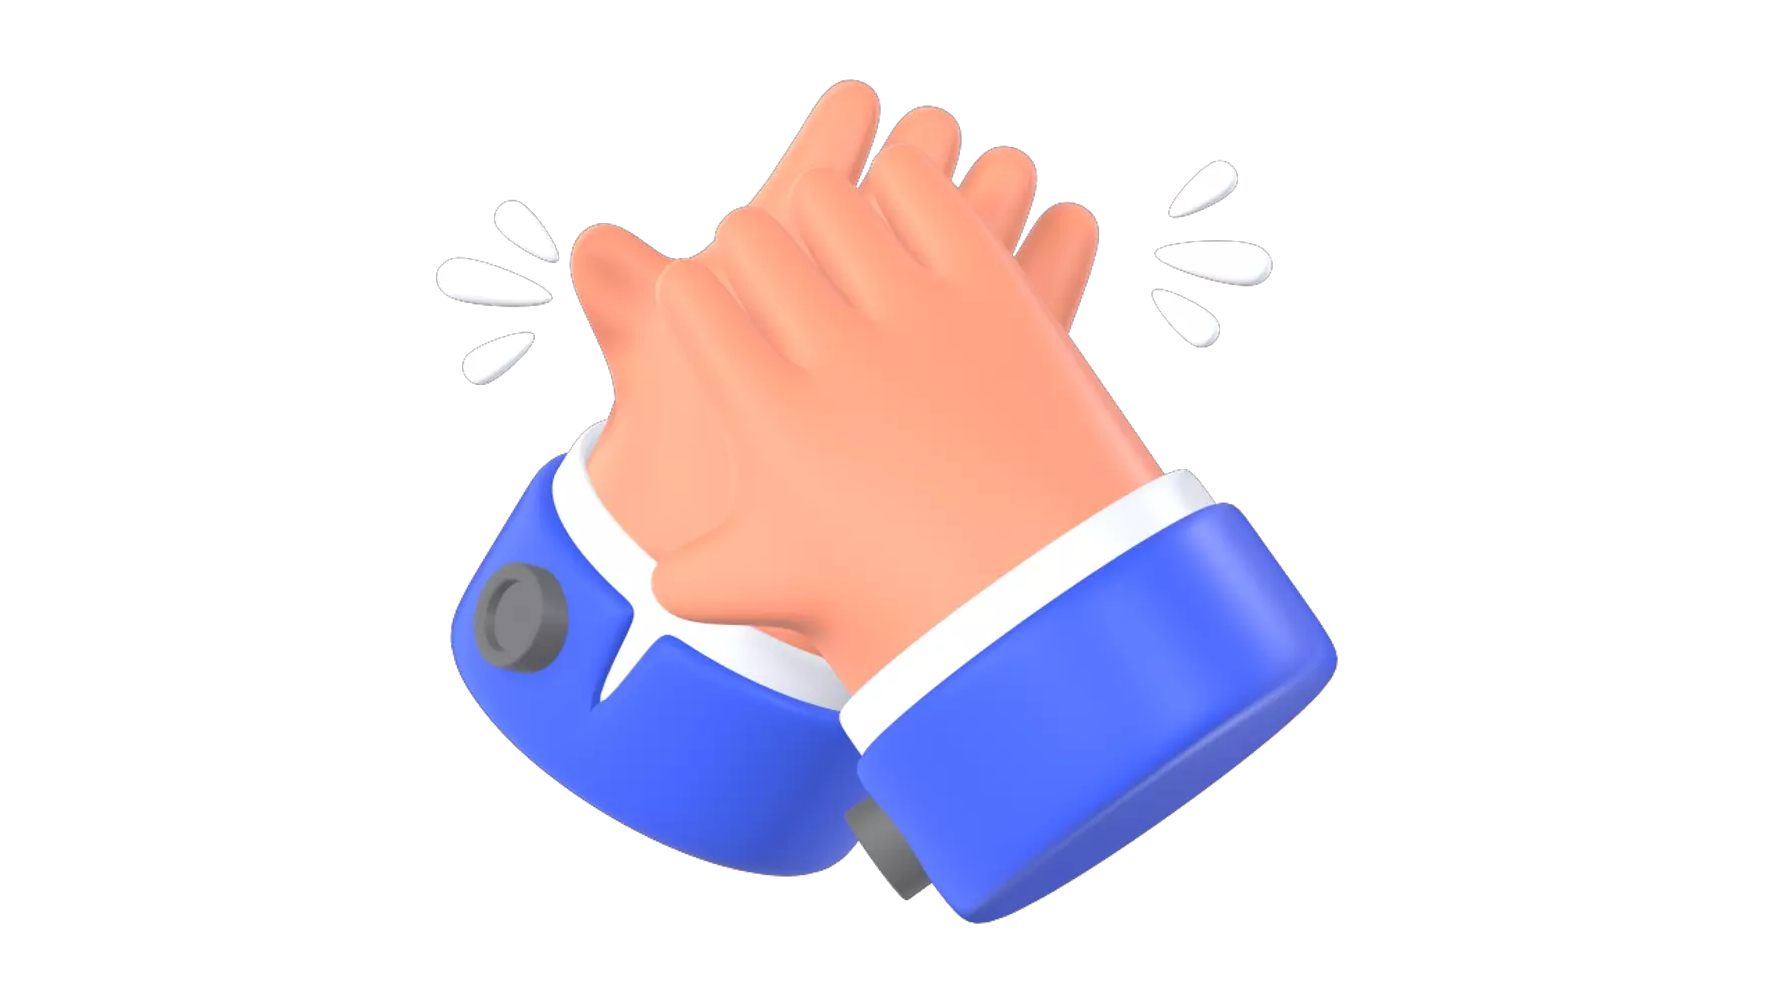 Clapping 3D Graphic